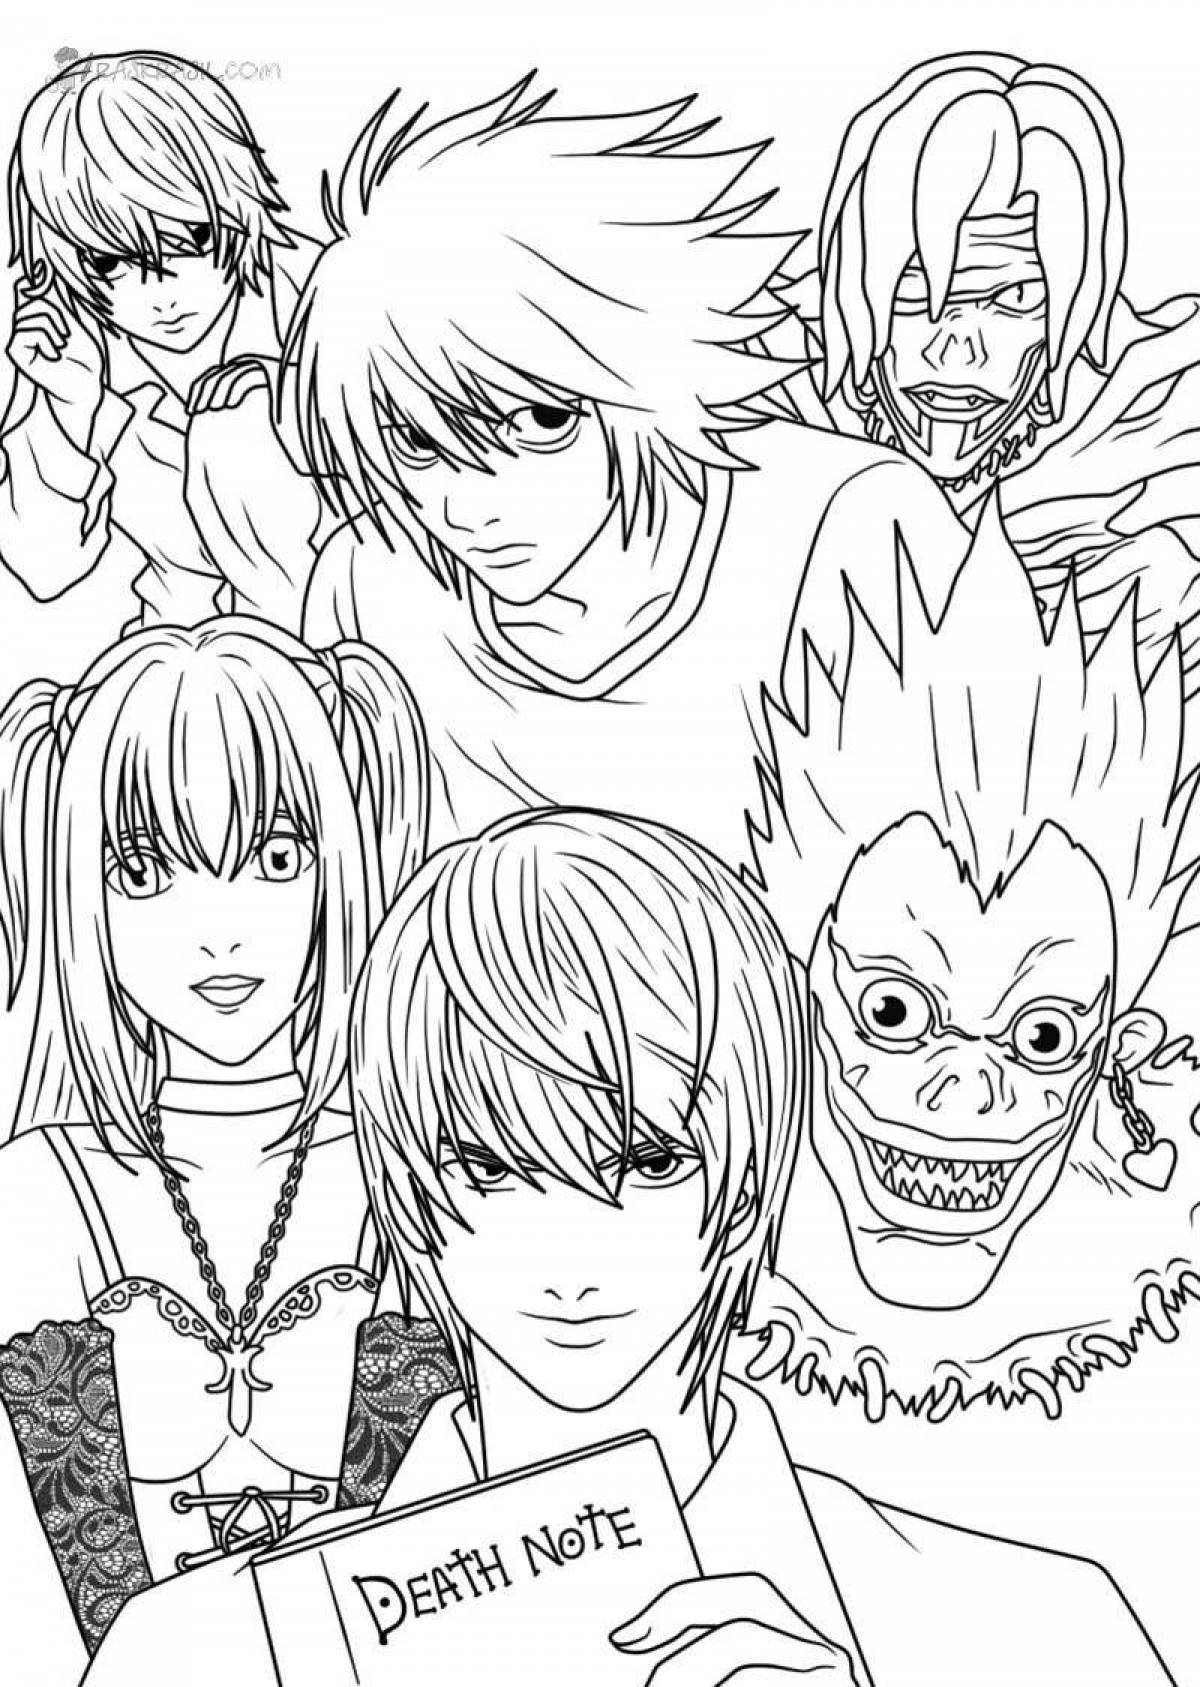 Anime death note #2